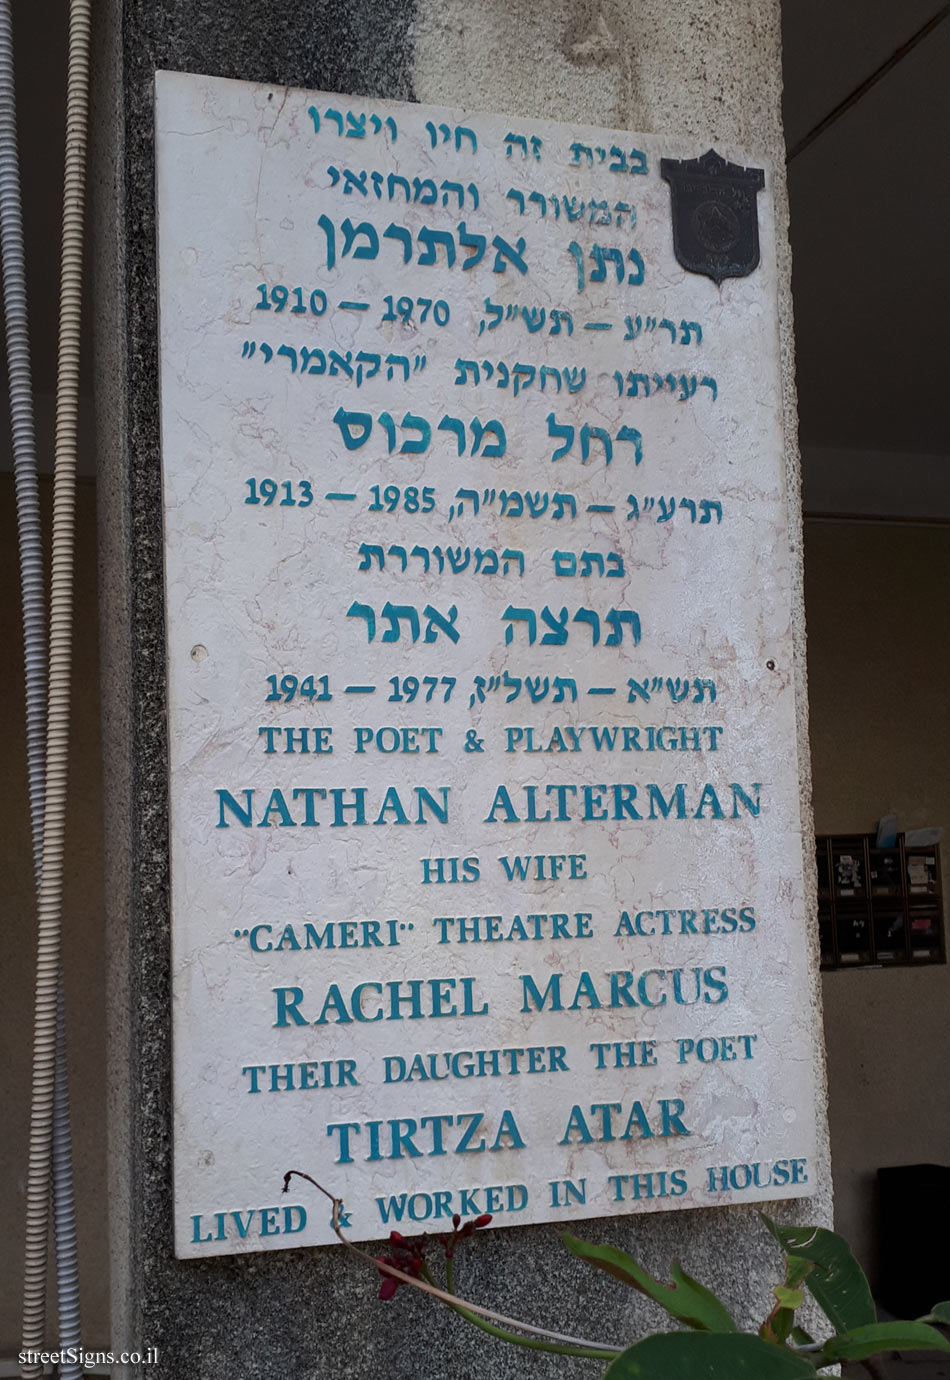 Nathan Alterman, Rachel Marcus and Tirtza Atar - Plaques of artists who lived in Tel Aviv